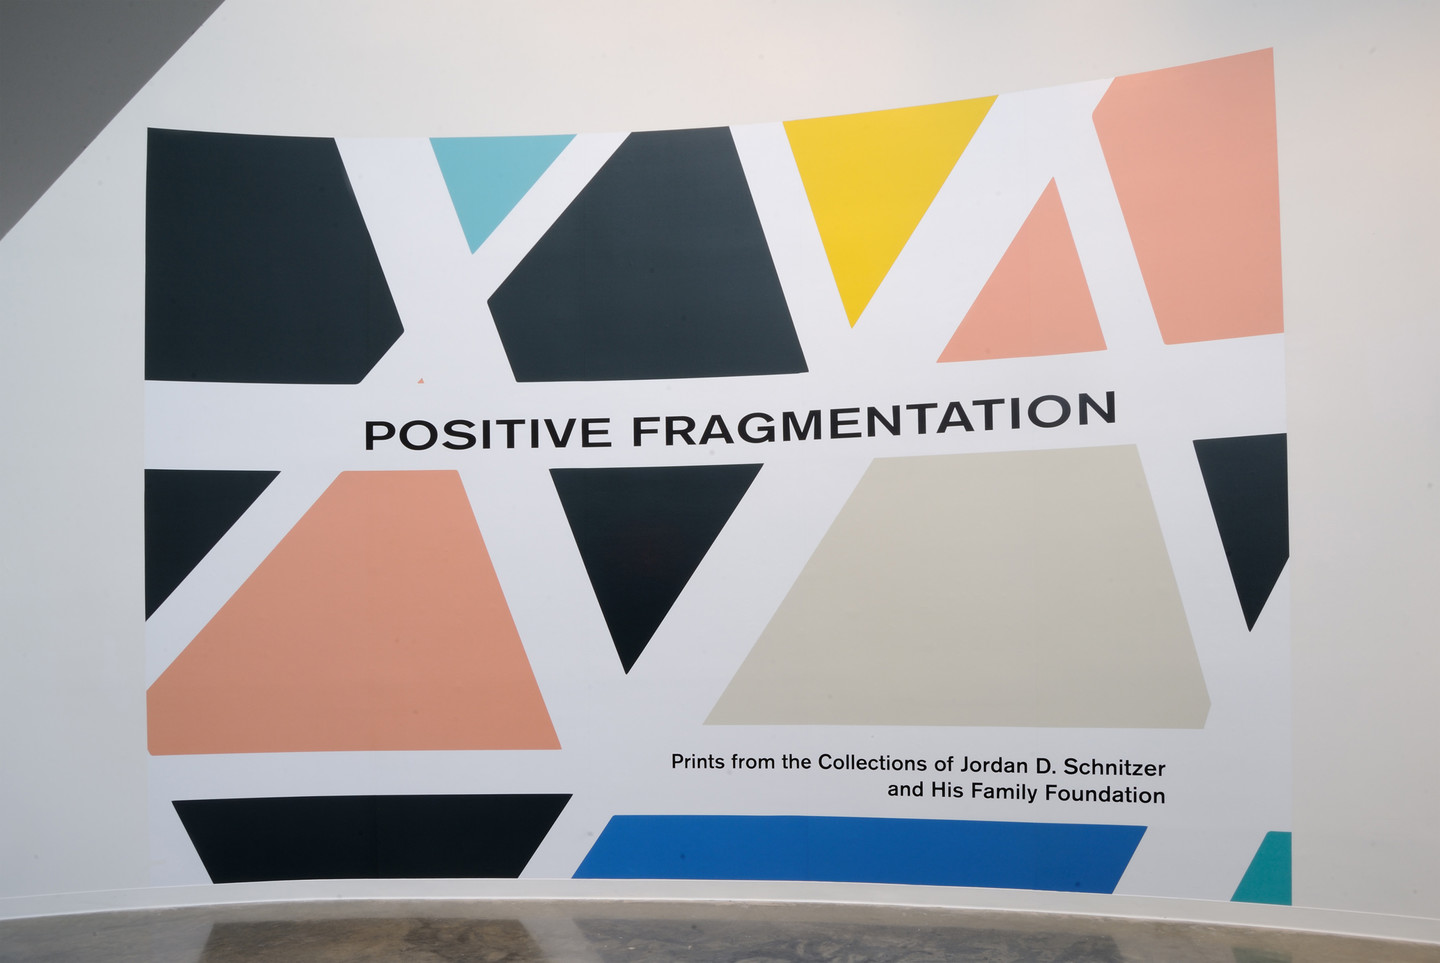 A curved white wall with a colorful geometric wall decal that reads "Positive Fragmentation" and "Prints from the Collections of Jordan D. Schnitzer and His Family Foundation"